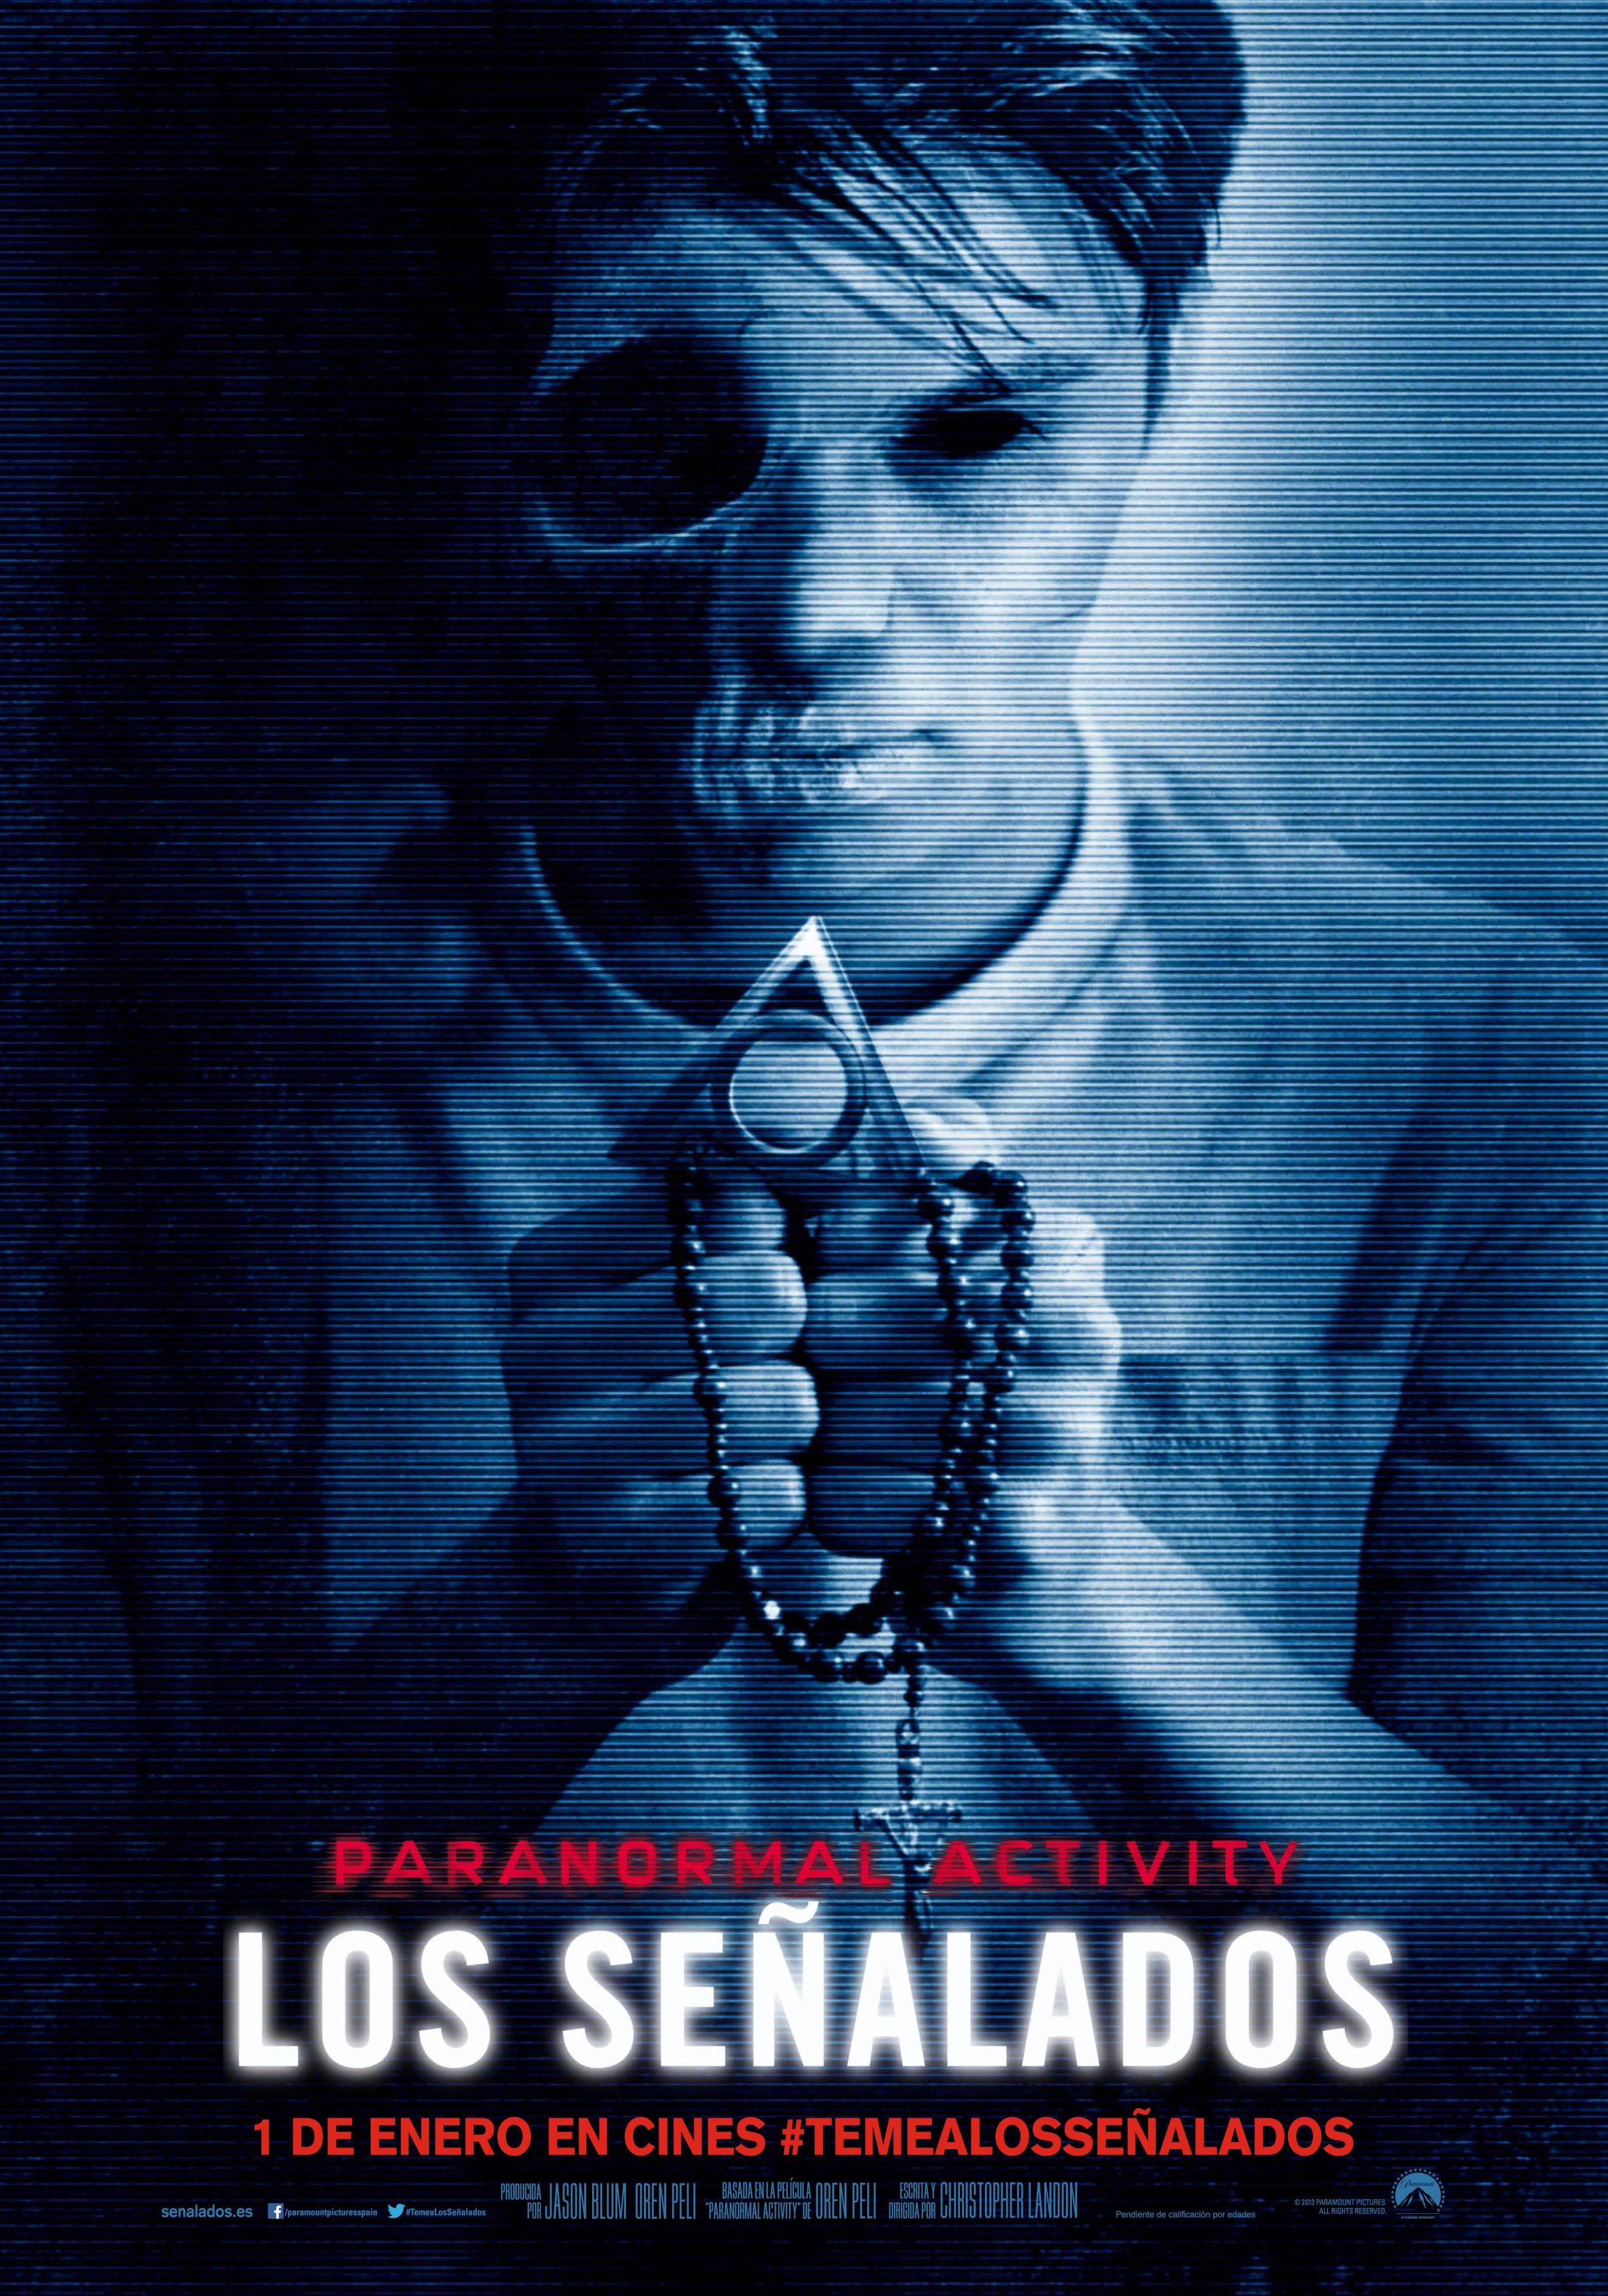 Paranormal Activity: The Marked Ones. 